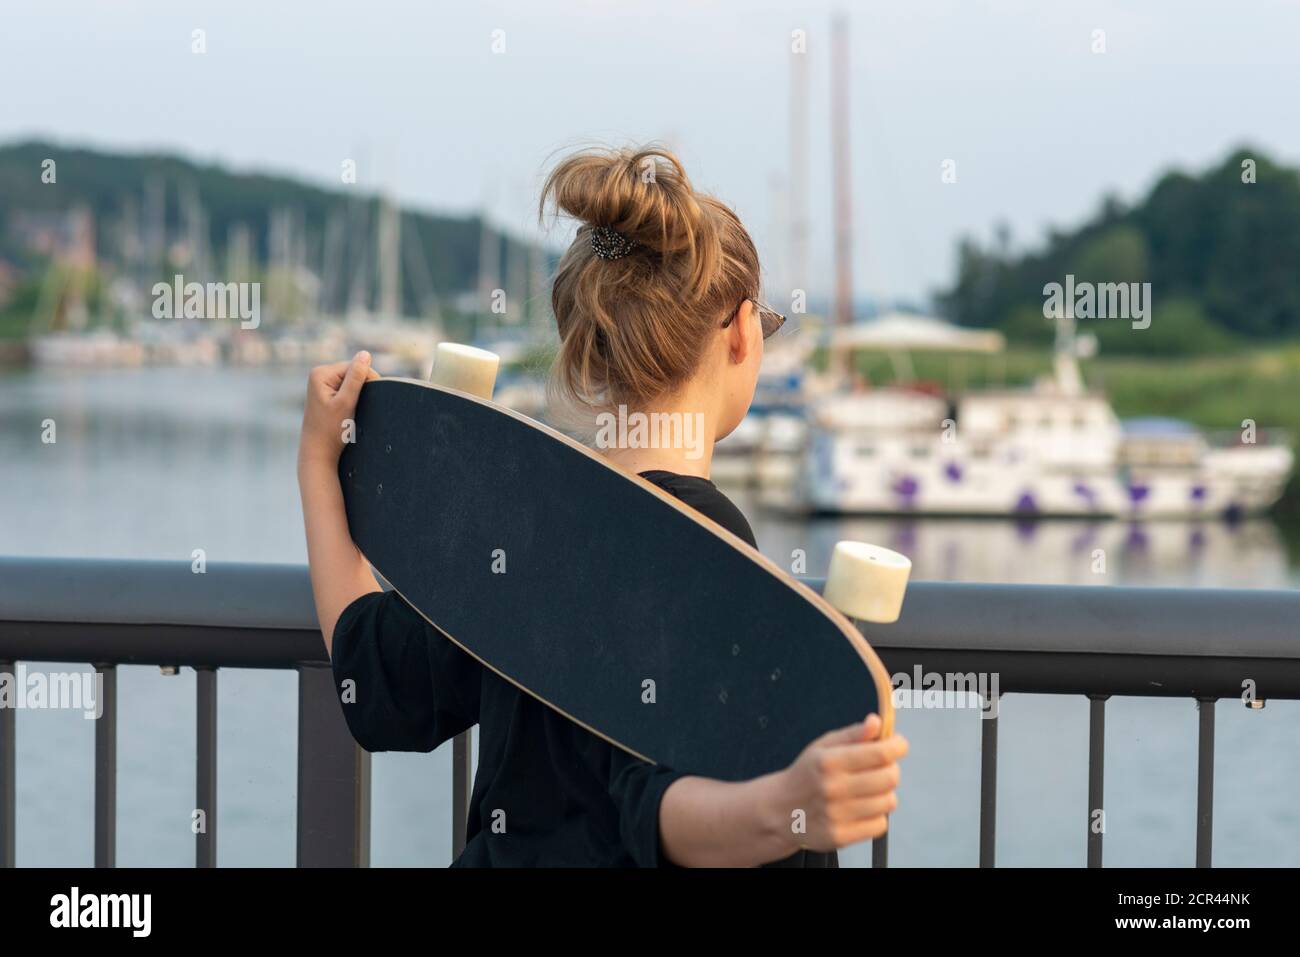 Girl stands with a longboard on a bridge in a sailing harbor Stock Photo